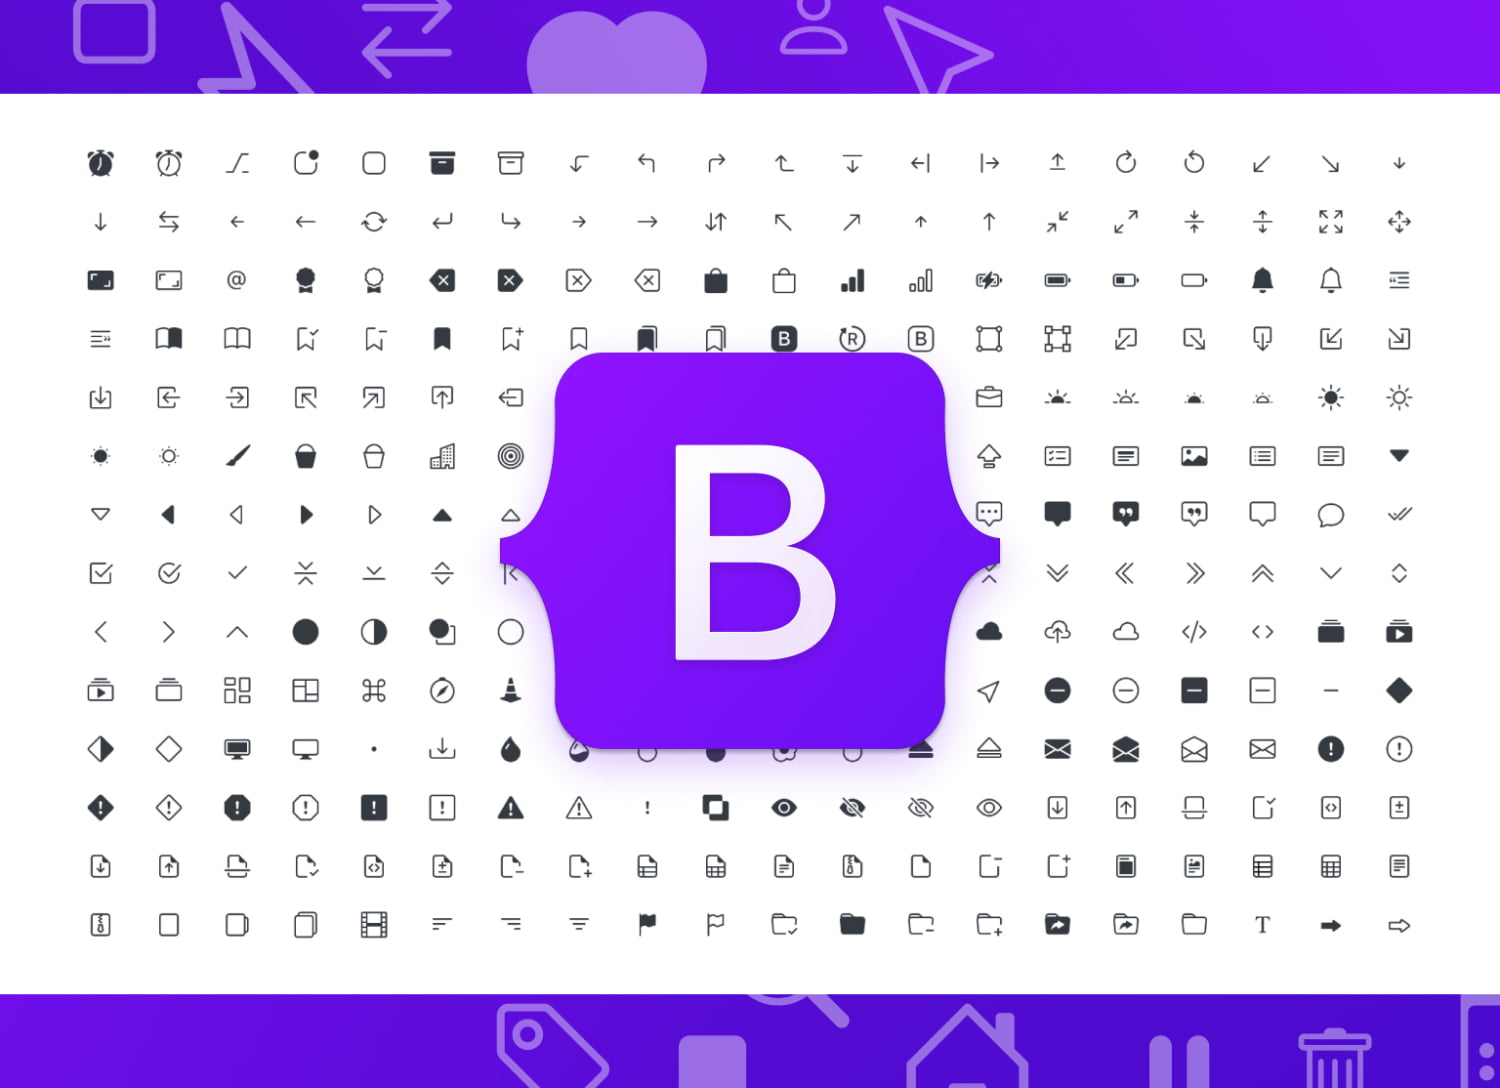 bootstrap-over-1300-icons-library-graphicsbunker